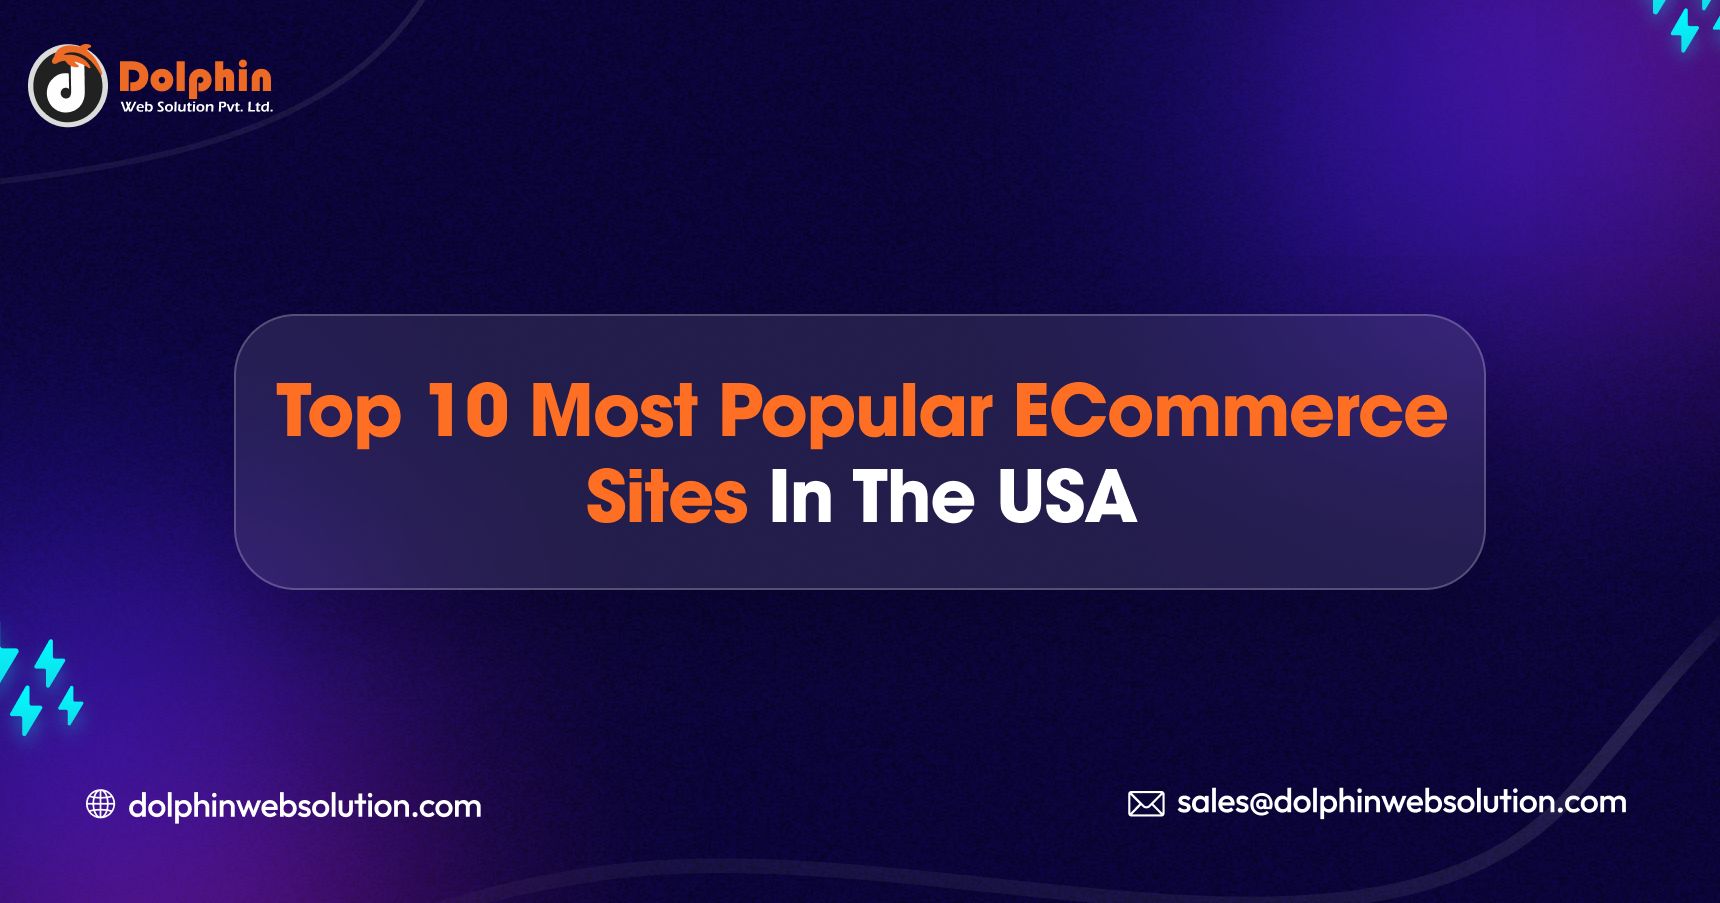 Top 10 Most Popular eCommerce Sites in the USA